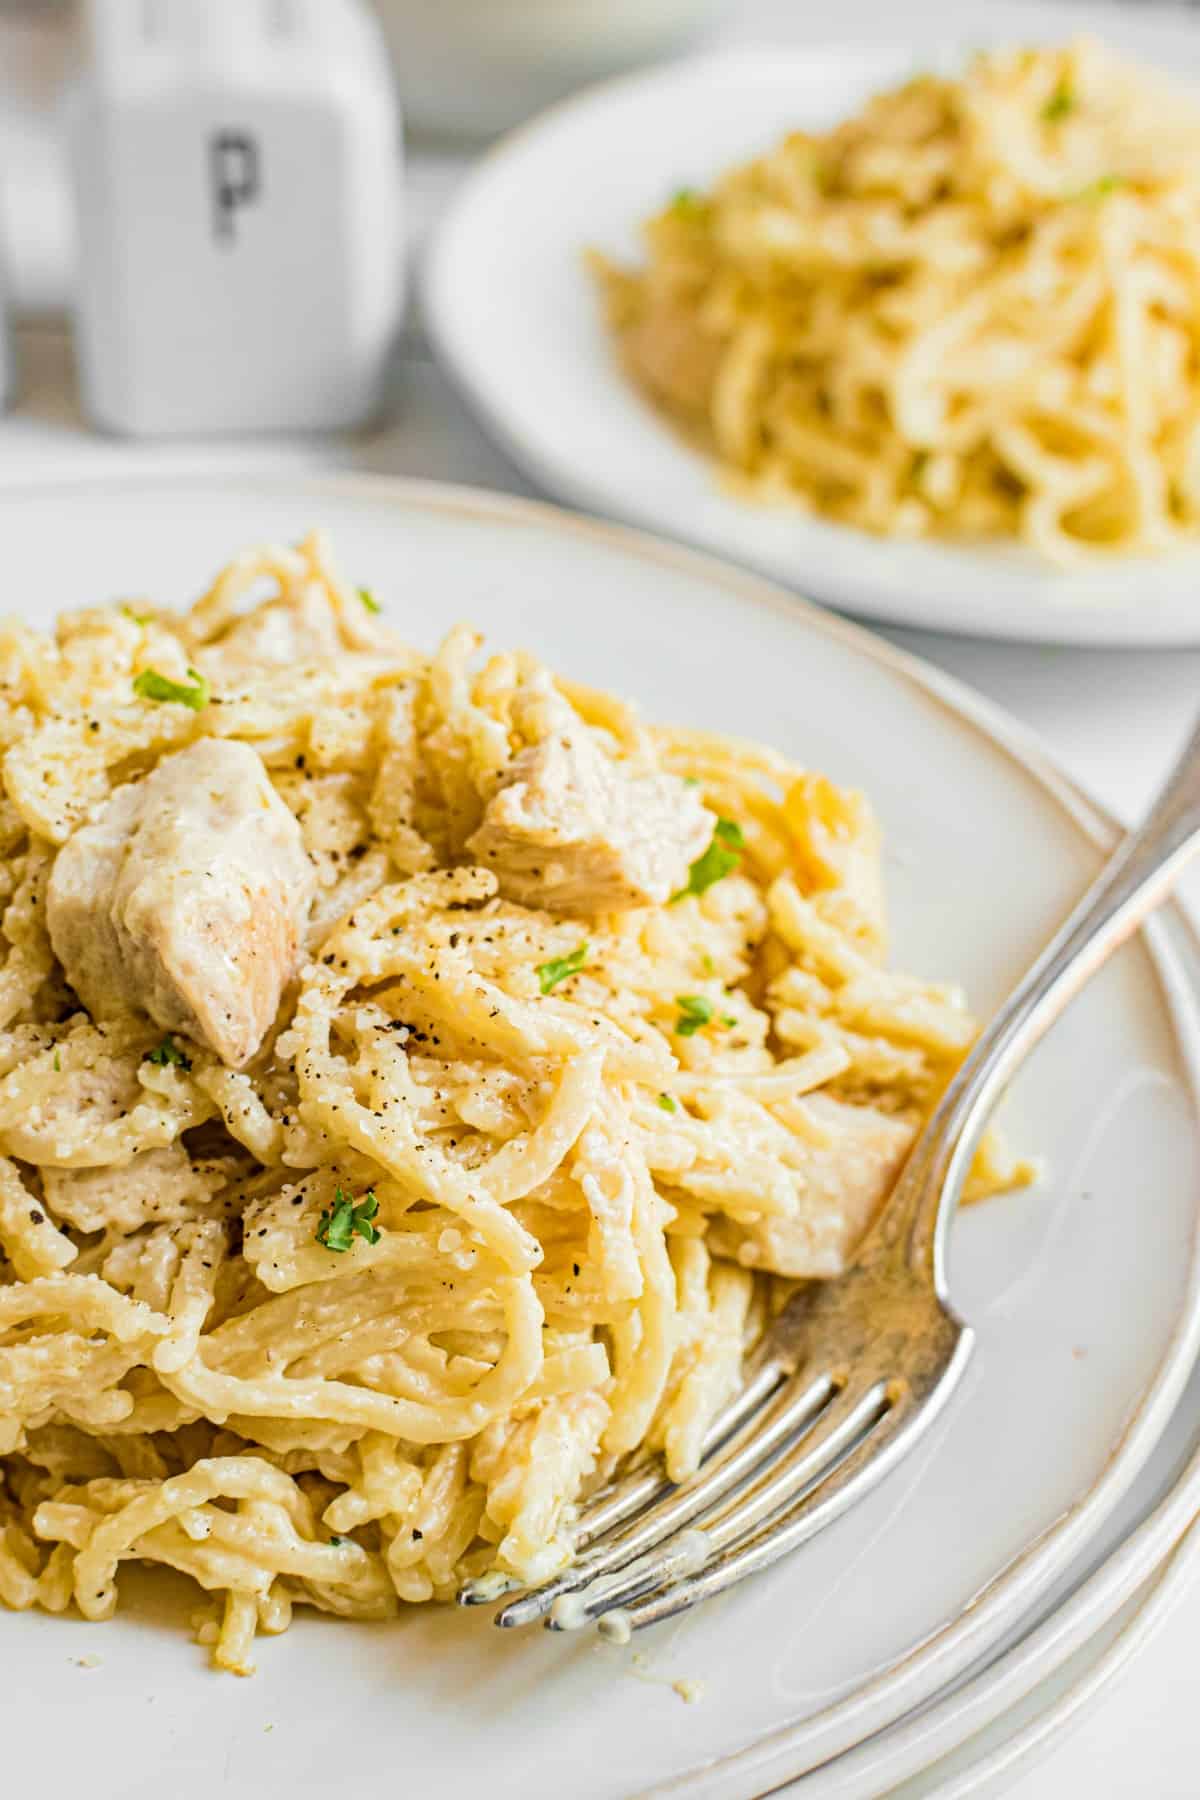 Chicken tetrazzini scooped onto a white dinner plate with silver fork.